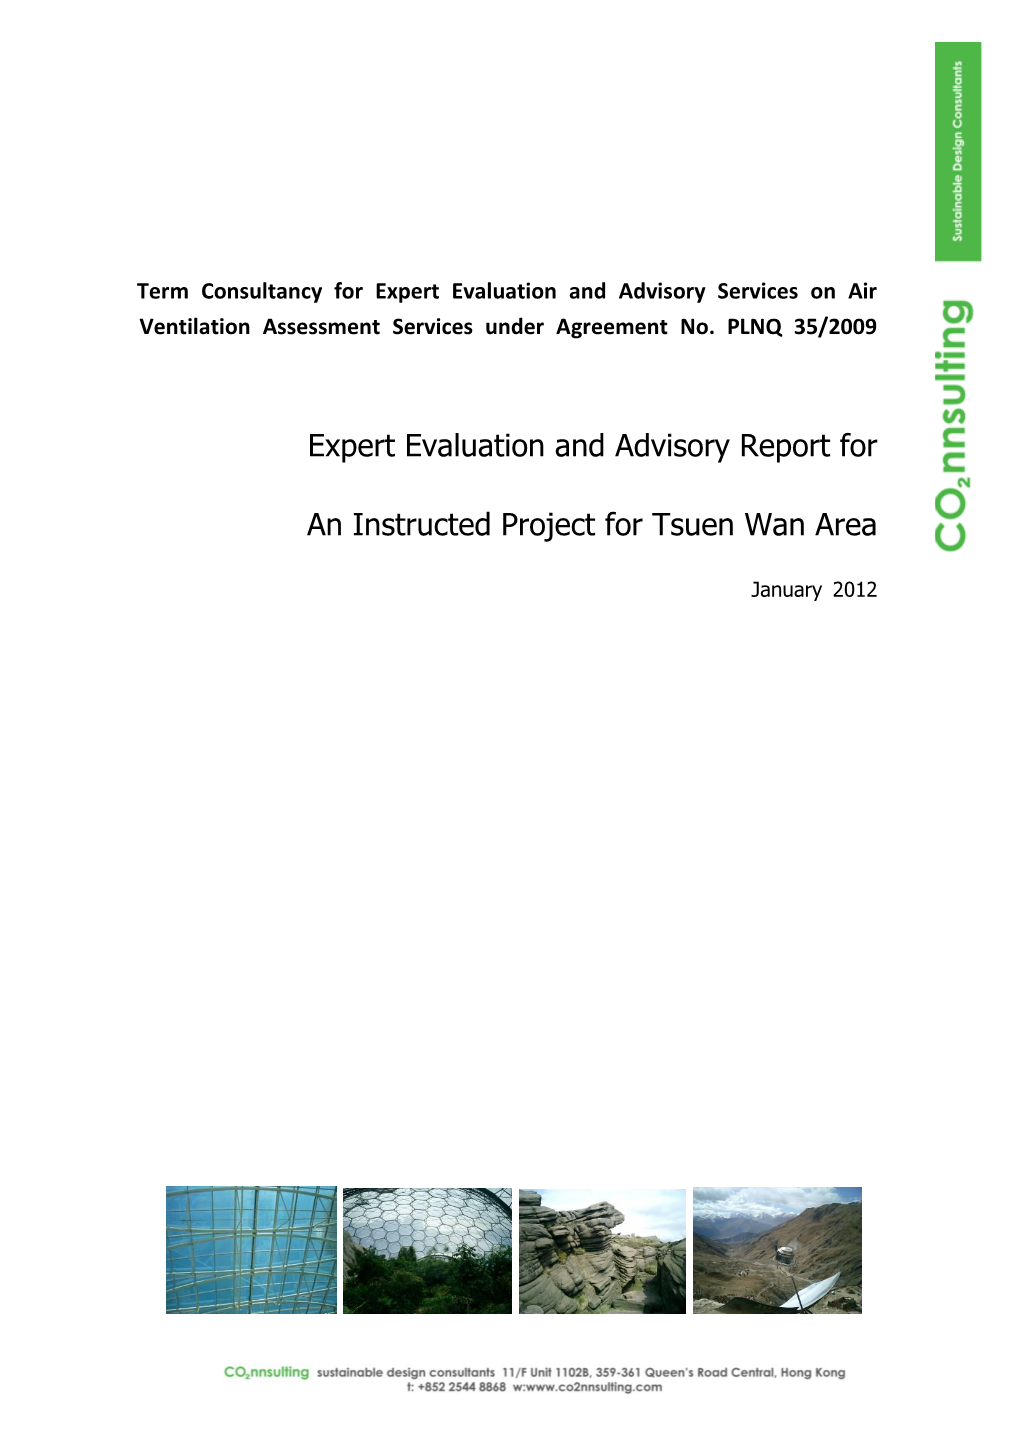 Expert Evaluation and Advisory Report for an Instructed Project For